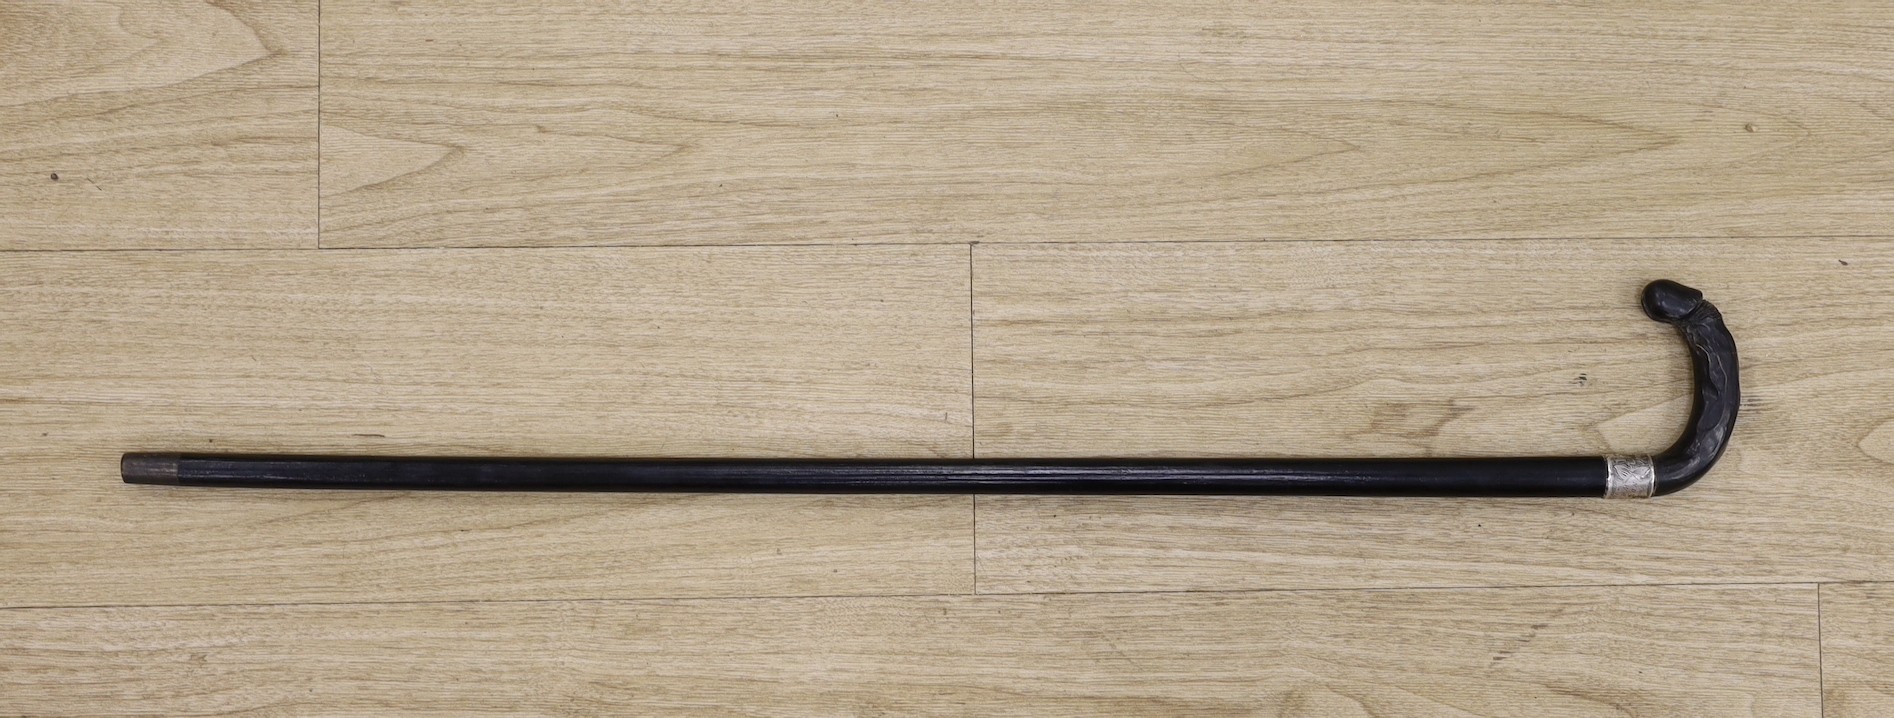 A silver mounted ebony cane with a phallic shaped handle, presented by N.D.T. Chapel to W.H. Miles, 1899. 82cm high